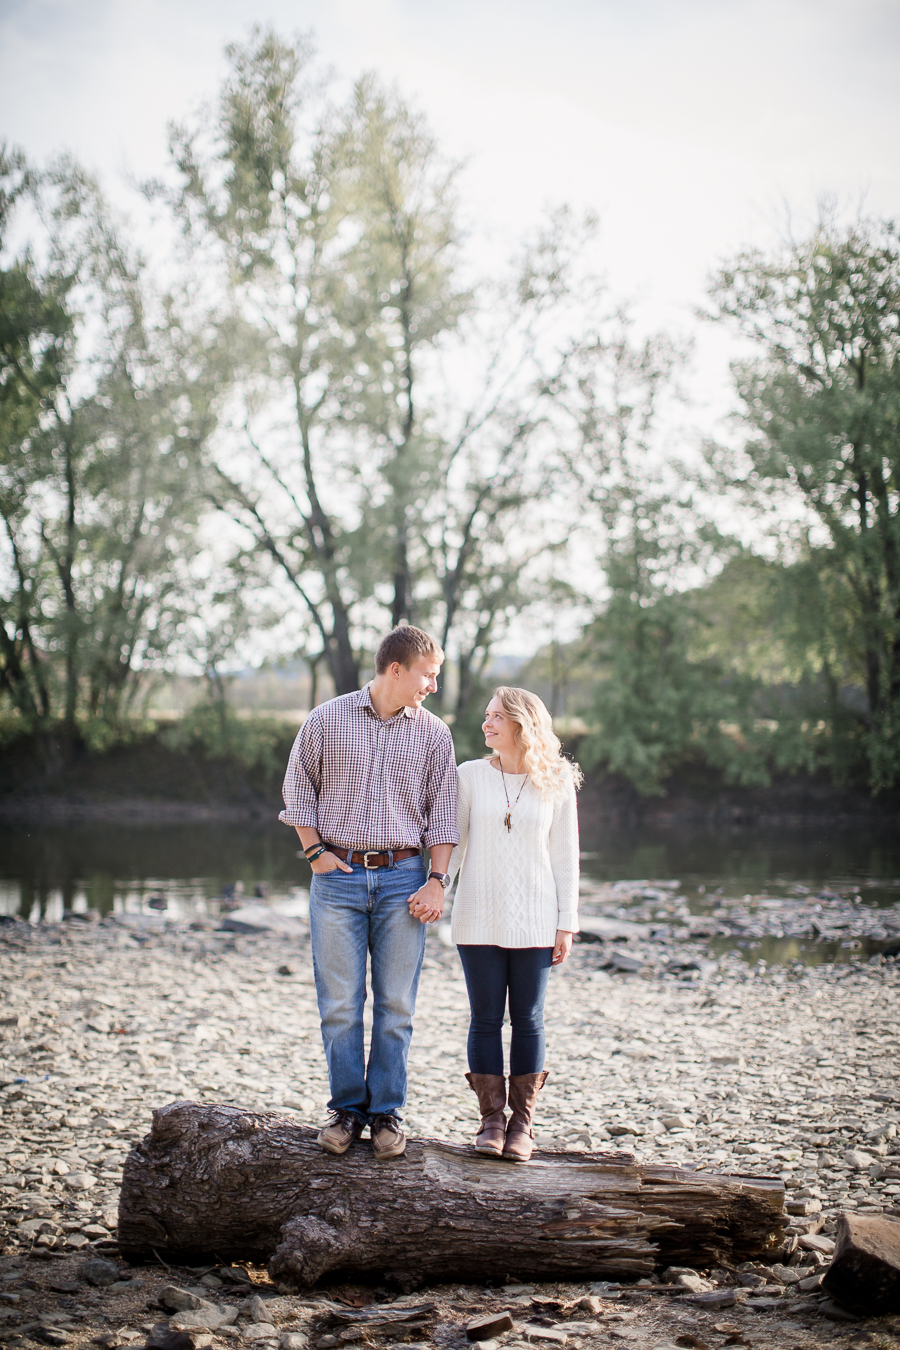 Walking in the sand engagement photo by Knoxville Wedding Photographer, Amanda May Photos.